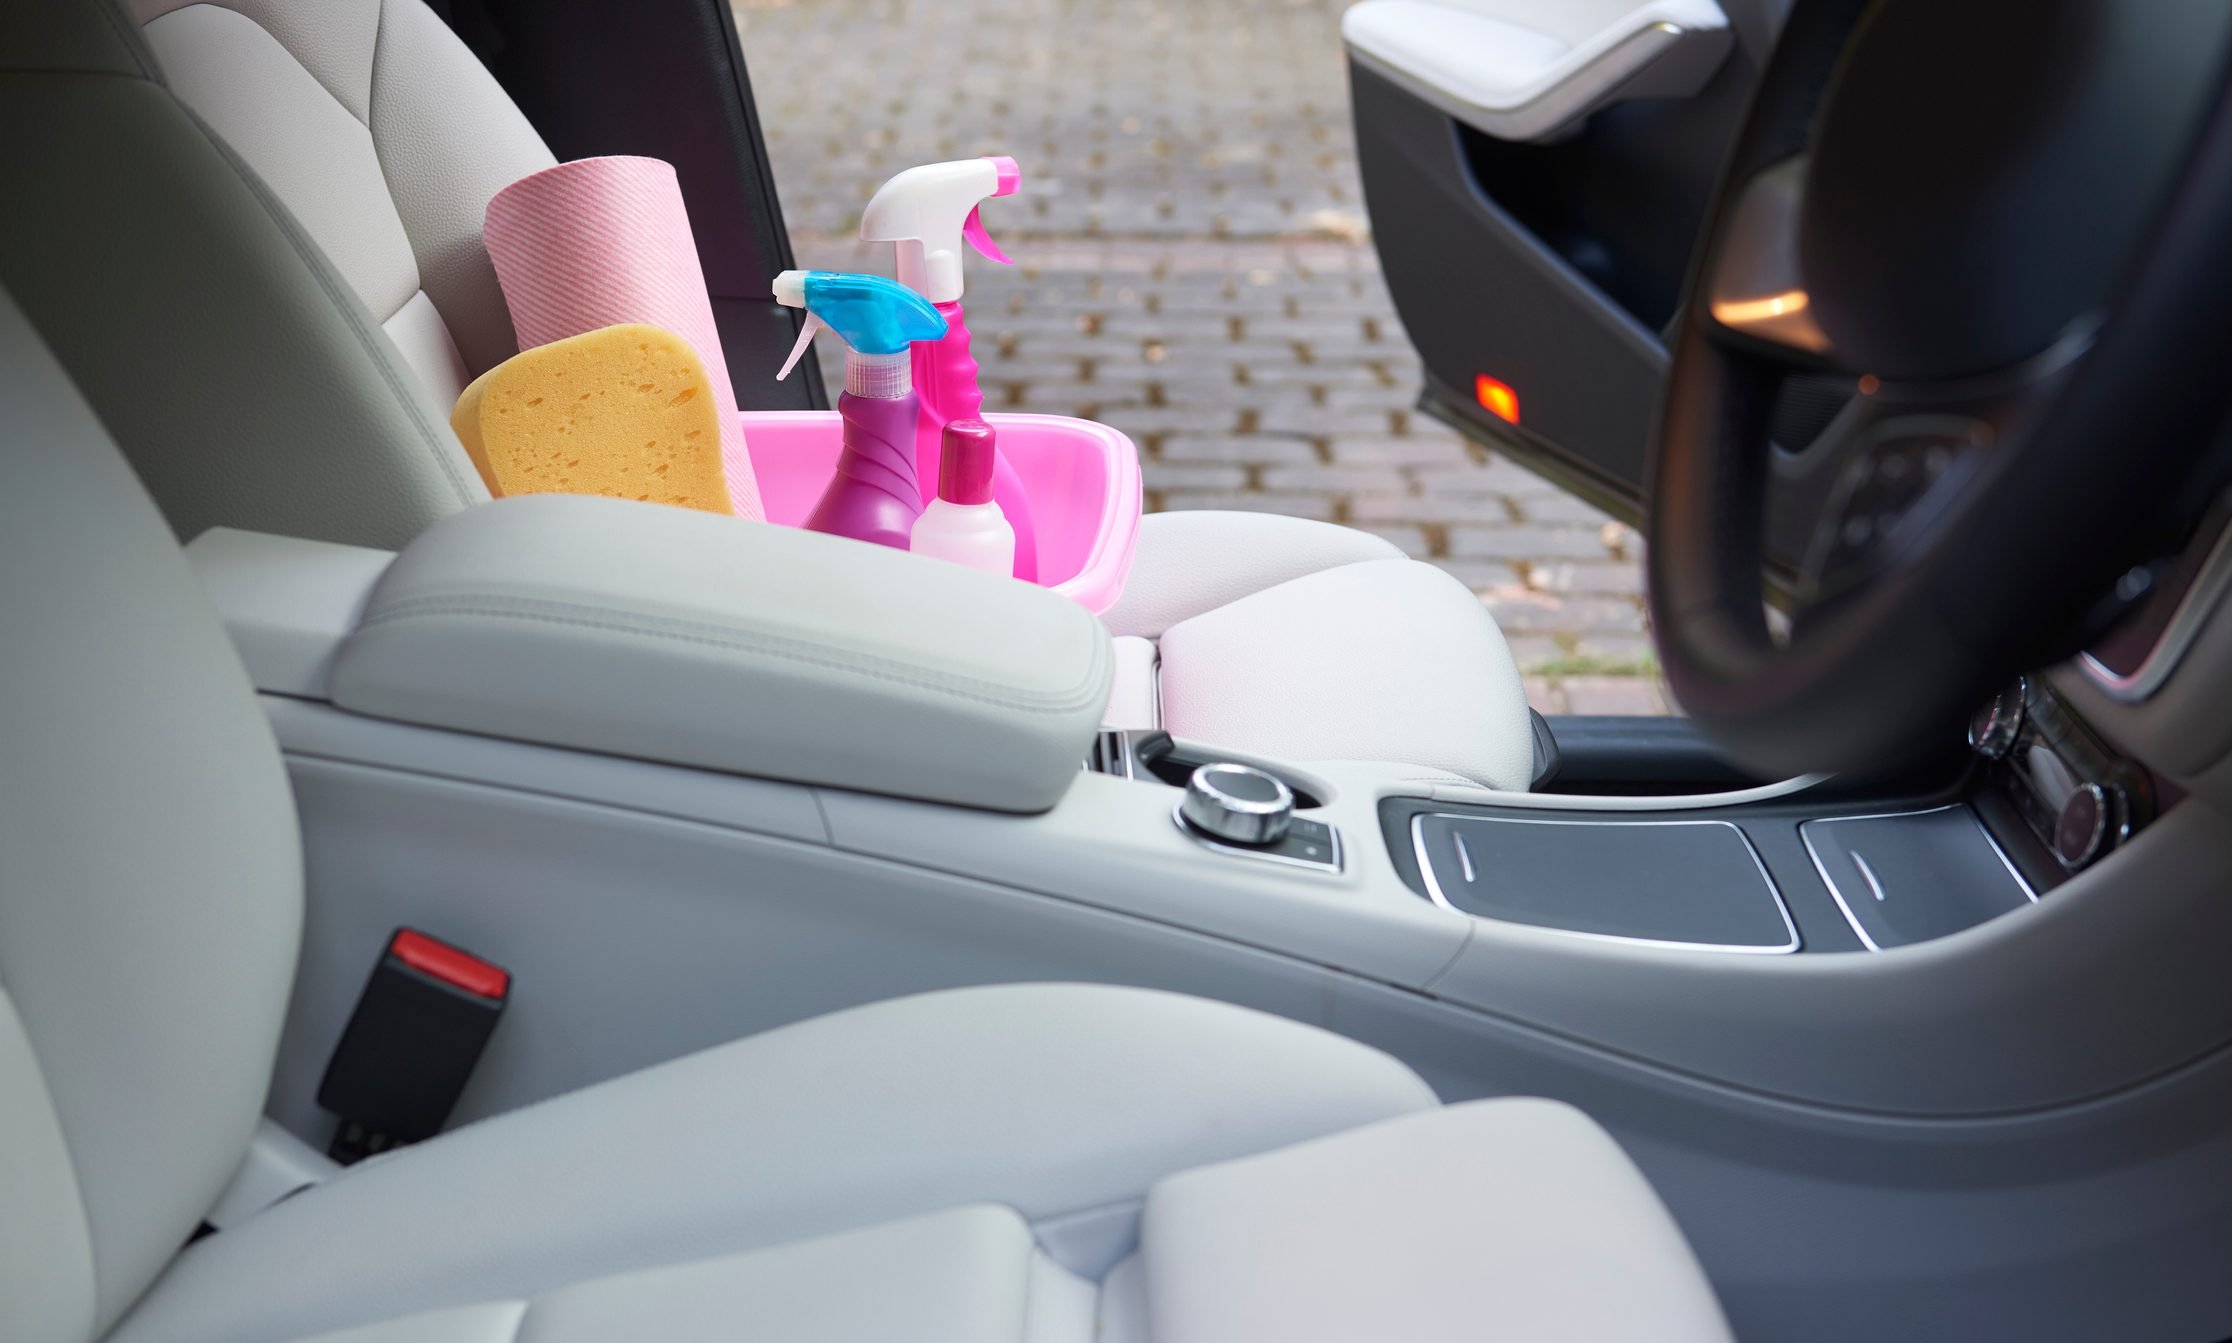 The Quickest Way To Clean Your Car's Interior - Organized-ish